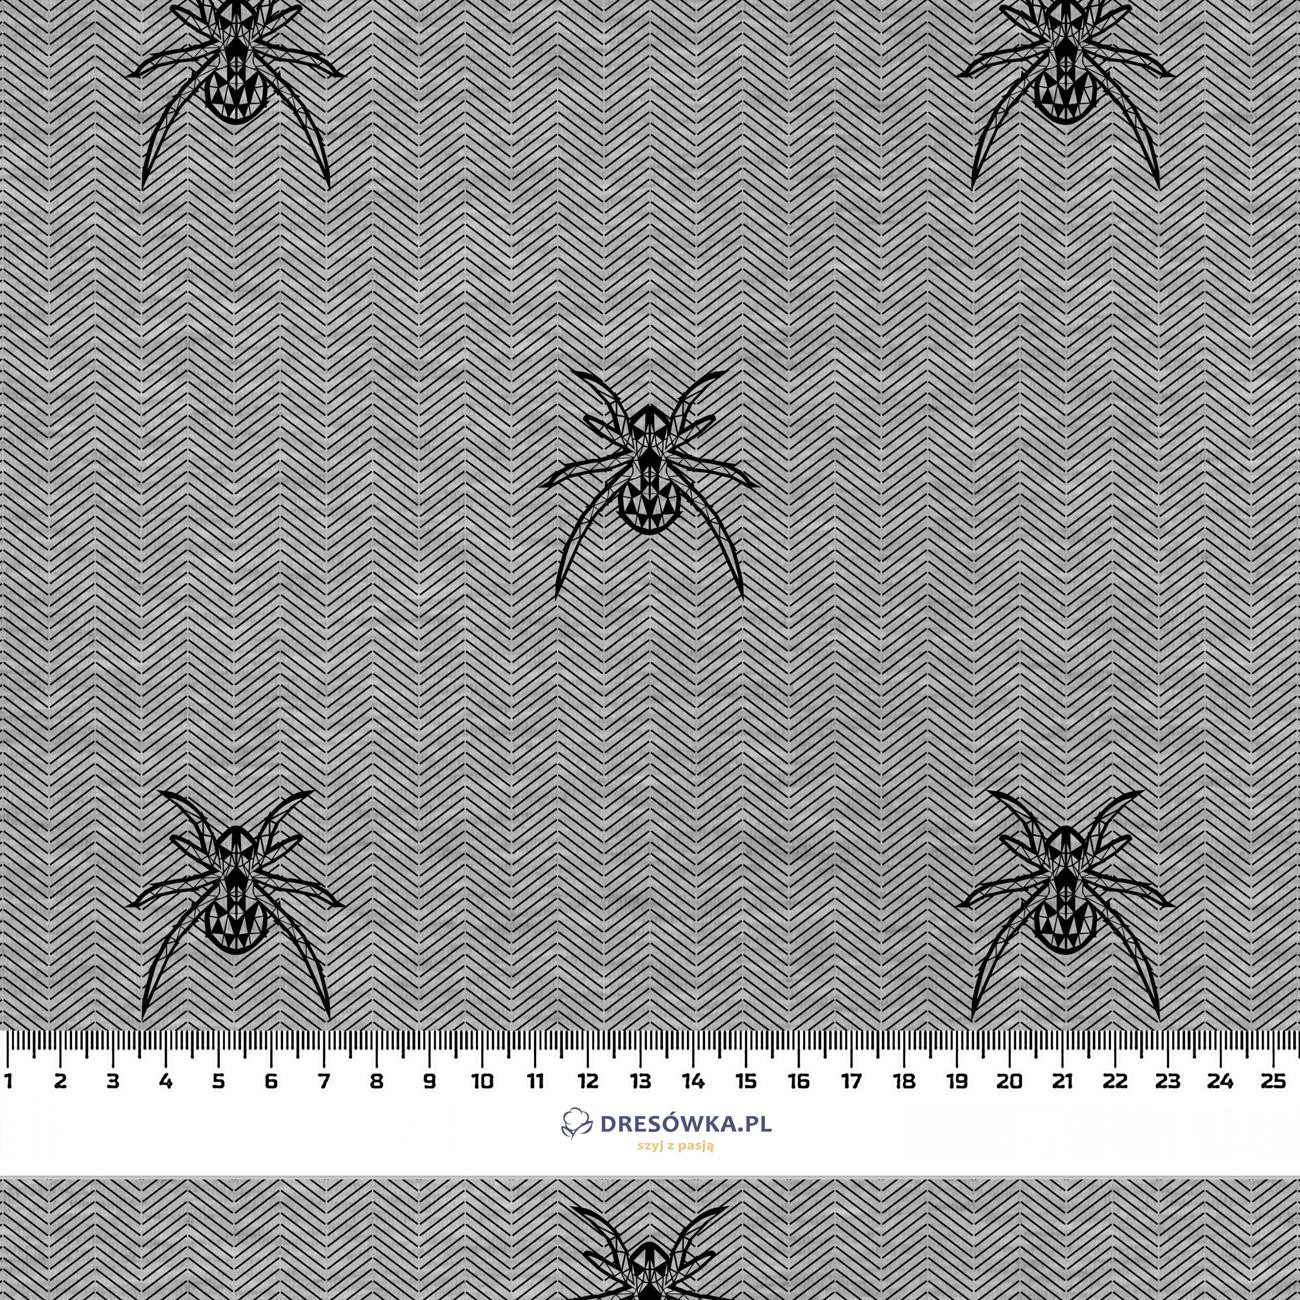 SPIDER / NIGHT CALL / grey - quick-drying woven fabric